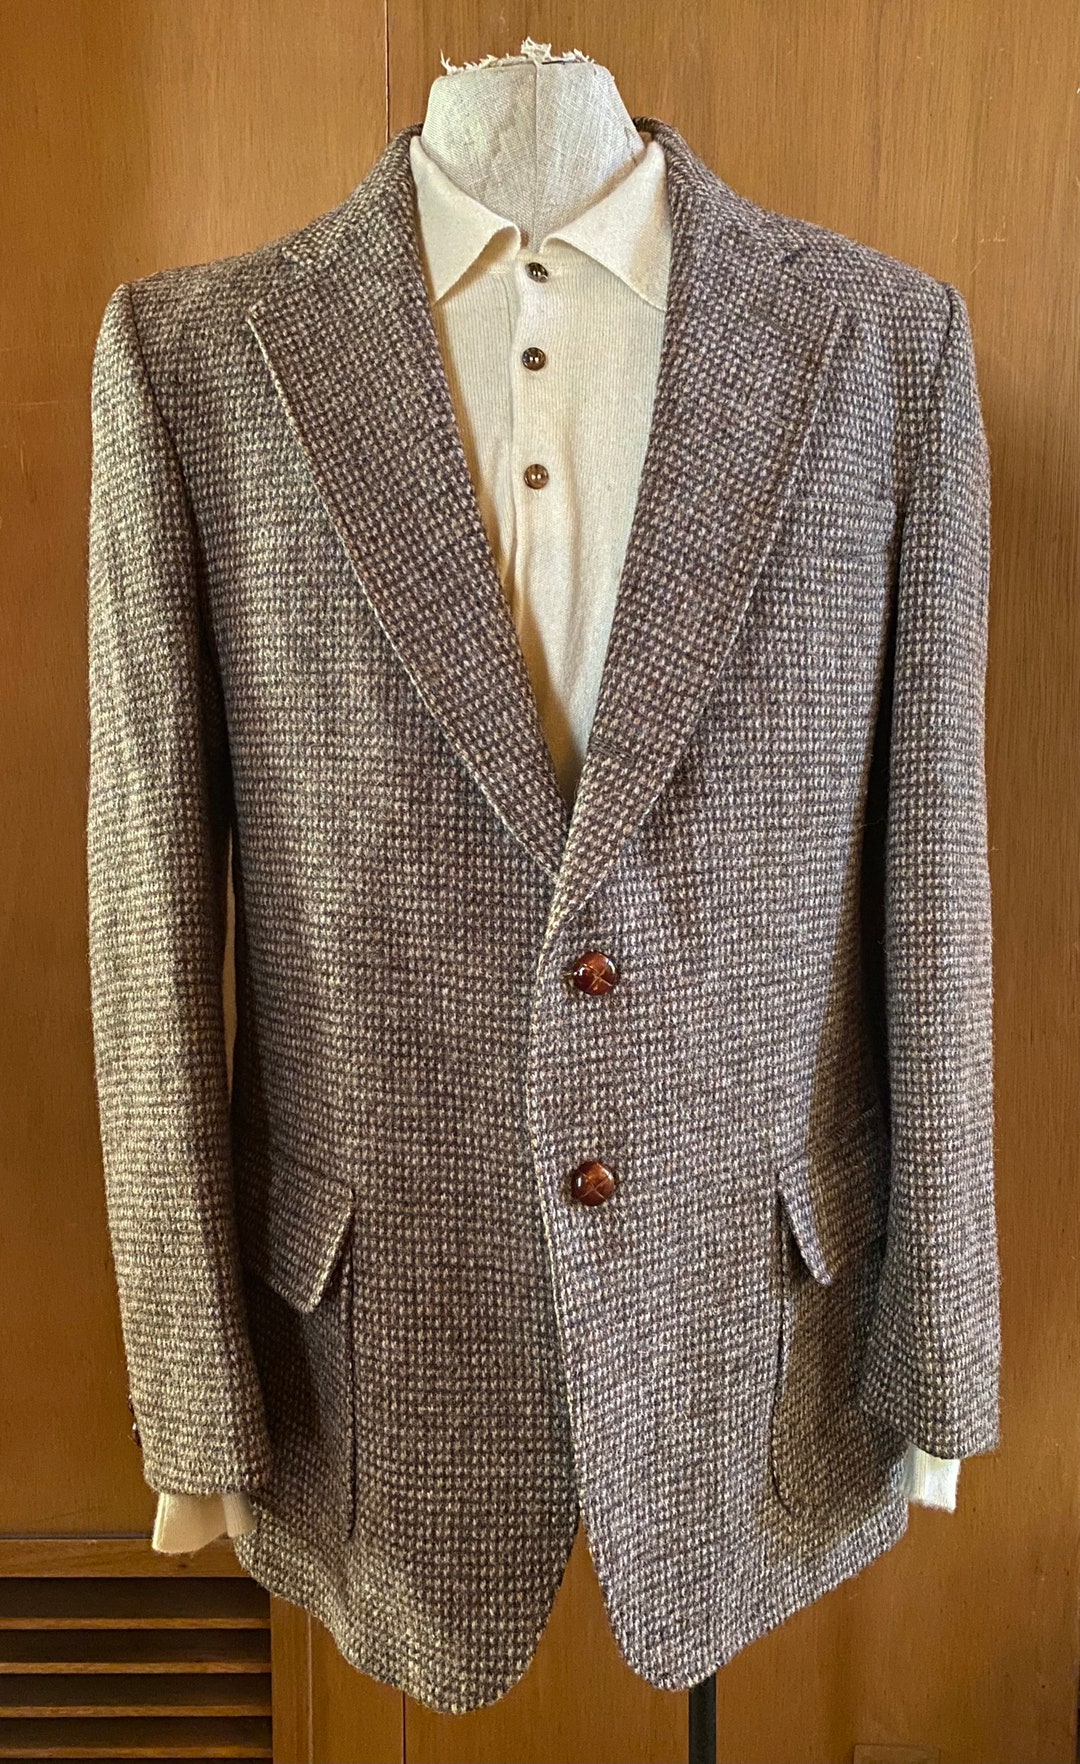 Pink and Grey Tweed Edge to Edge Jacket with Striped Silk Lining Chanel